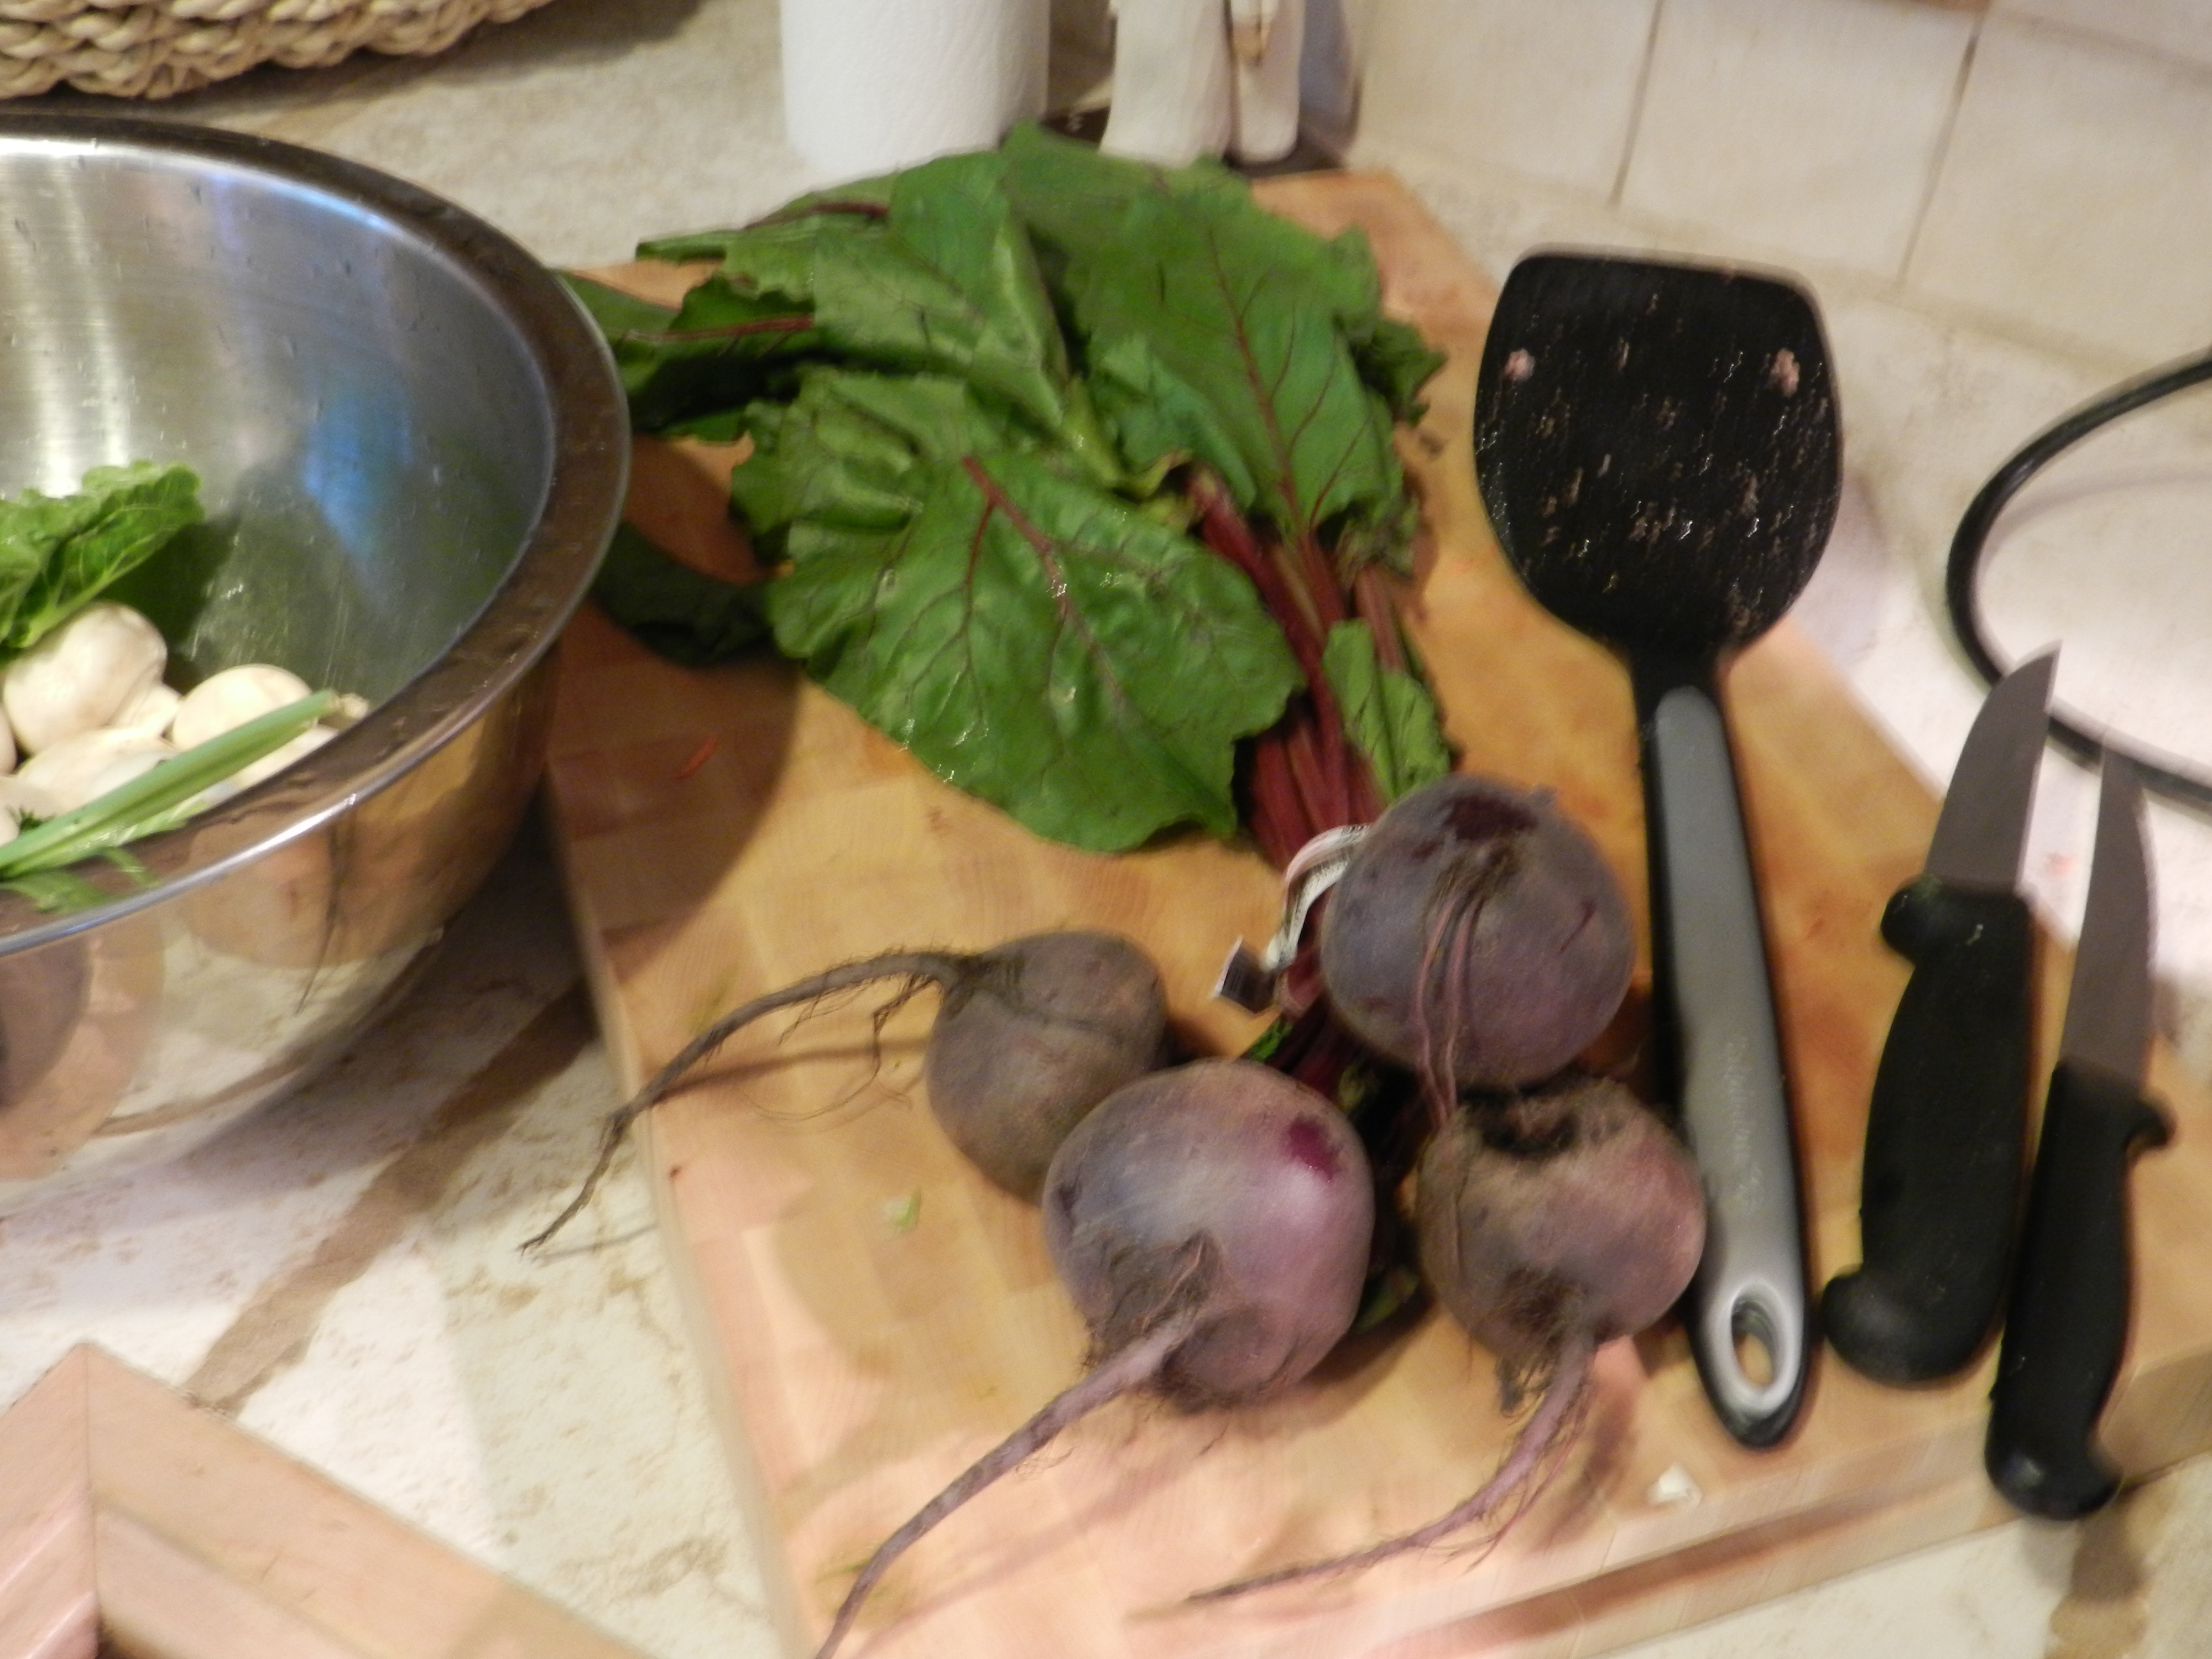 Beets Nutritional Value